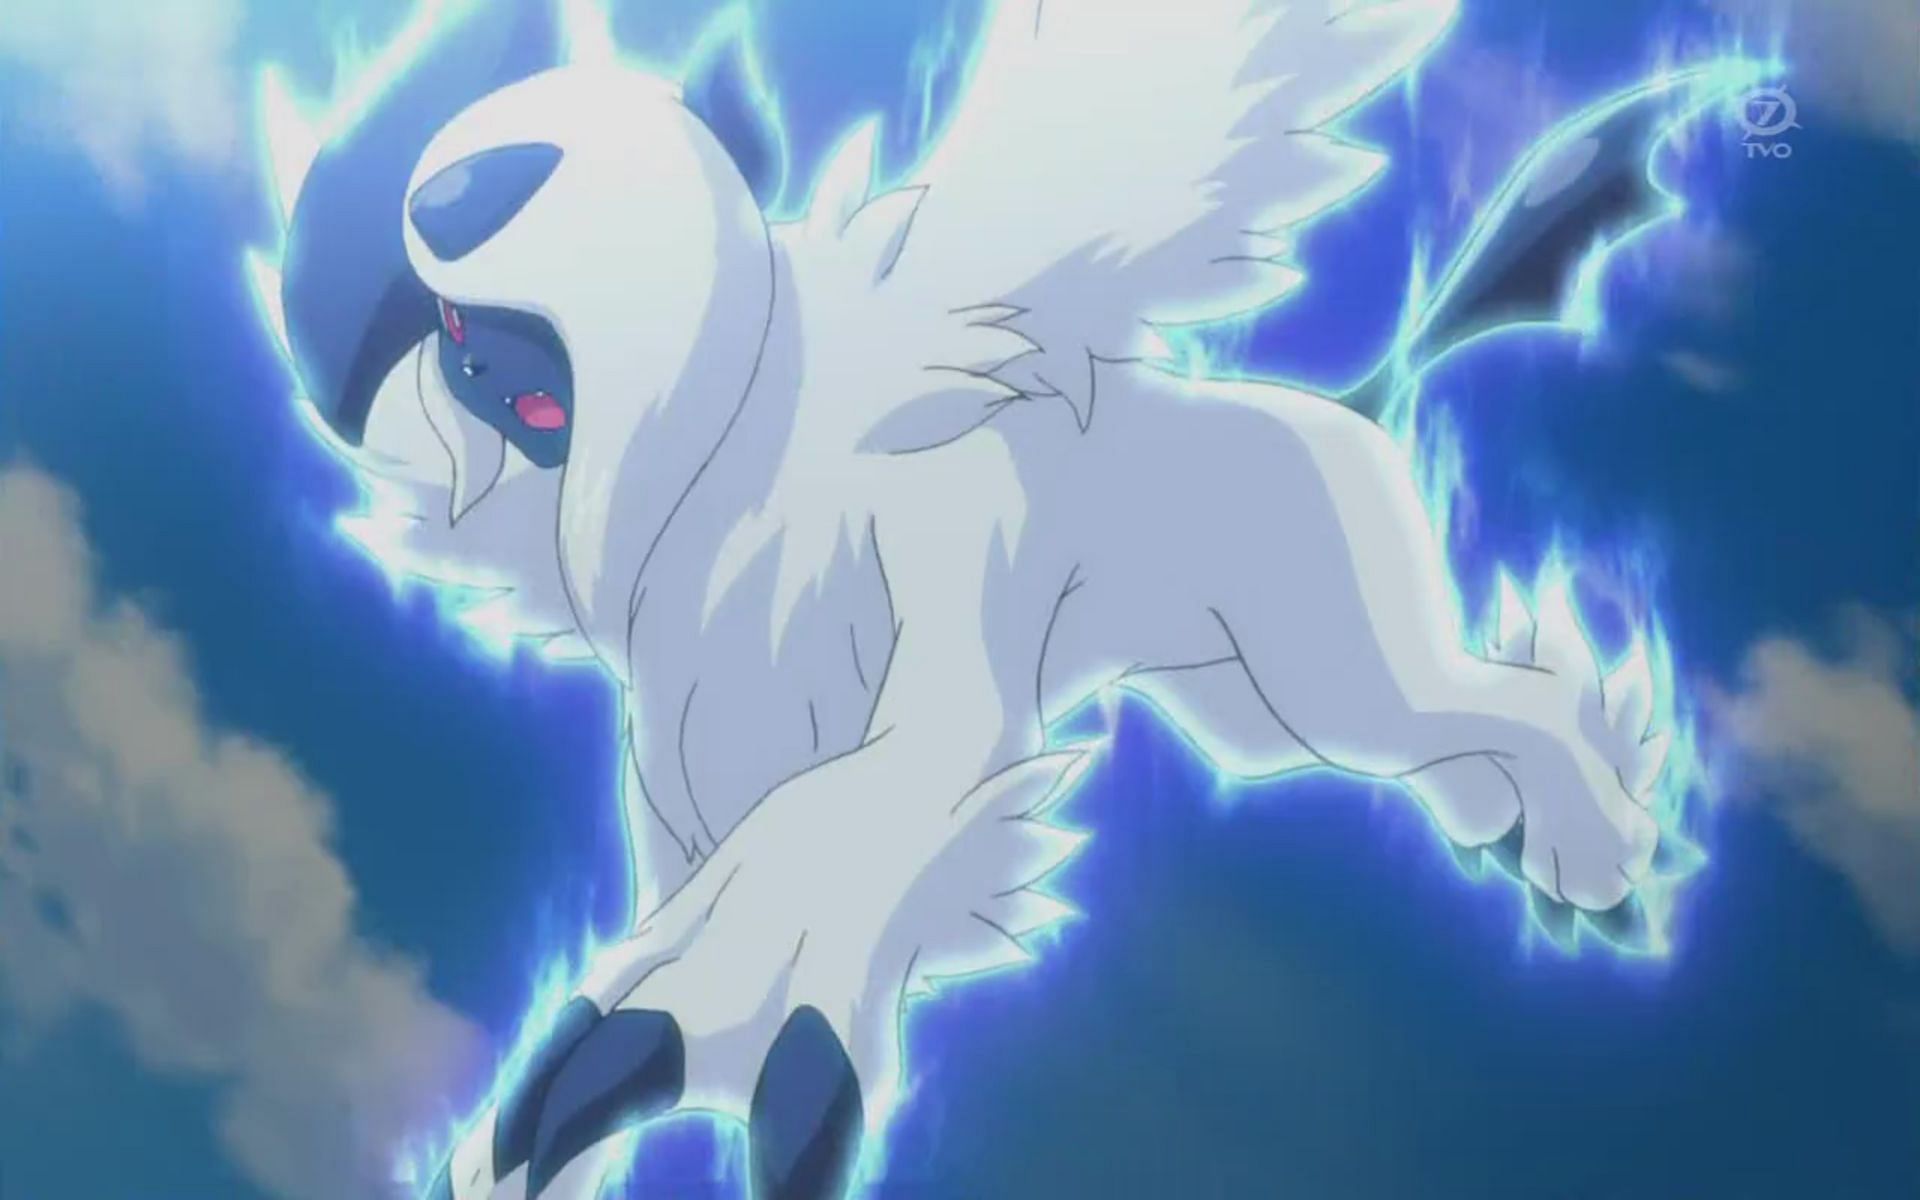 Mega Absol has one of the highest Attack stats in Pokemon GO (Image via The Pokemon Company)